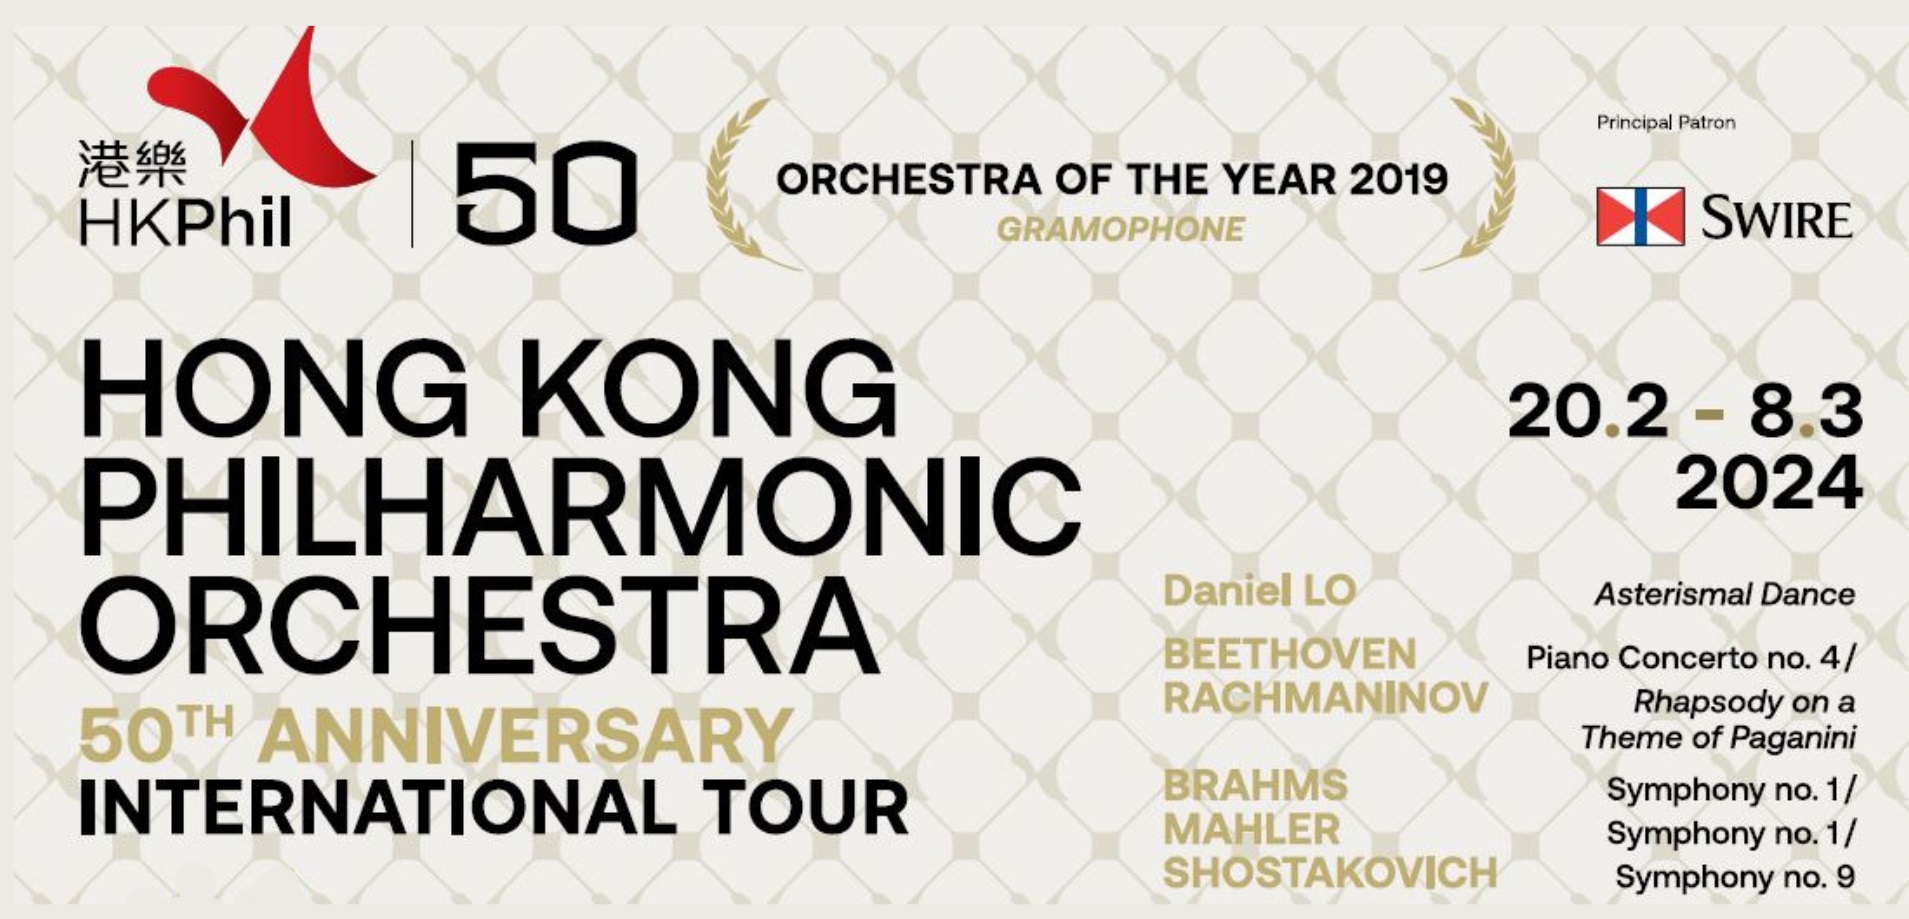 Concerts by the Hong Kong Philharmonic Orchestra